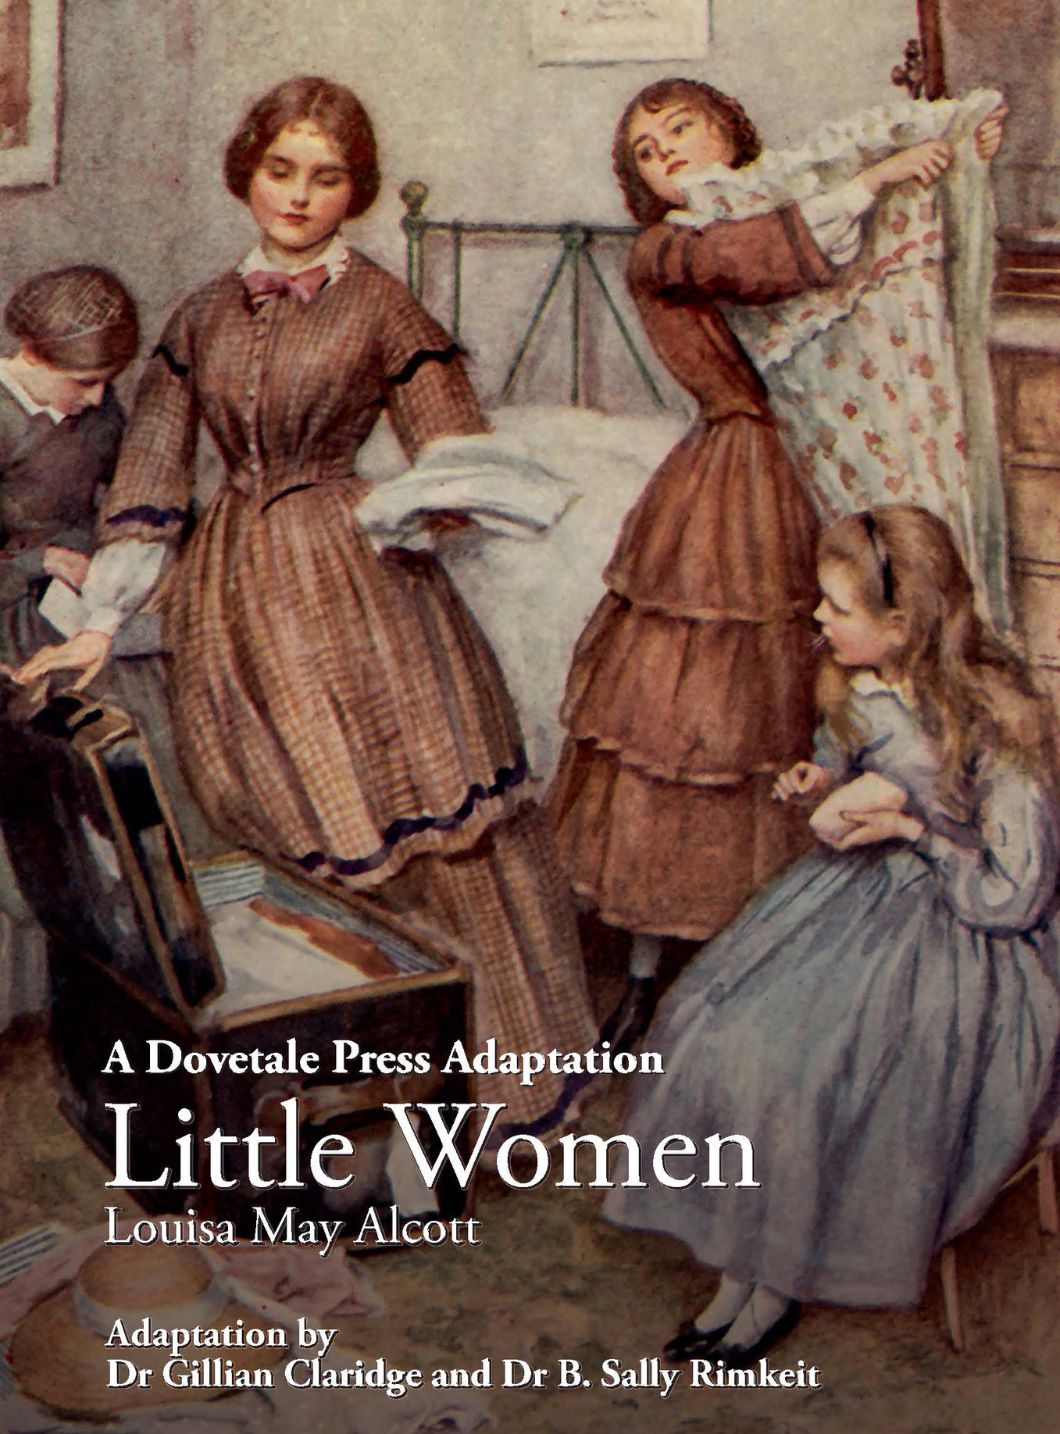 Book cover of Dovetale Press Adaptation of Little Women by Louisa May Alcott. Adapted by Dr Gillian Claridge and Dr B. Sally Rimkeit